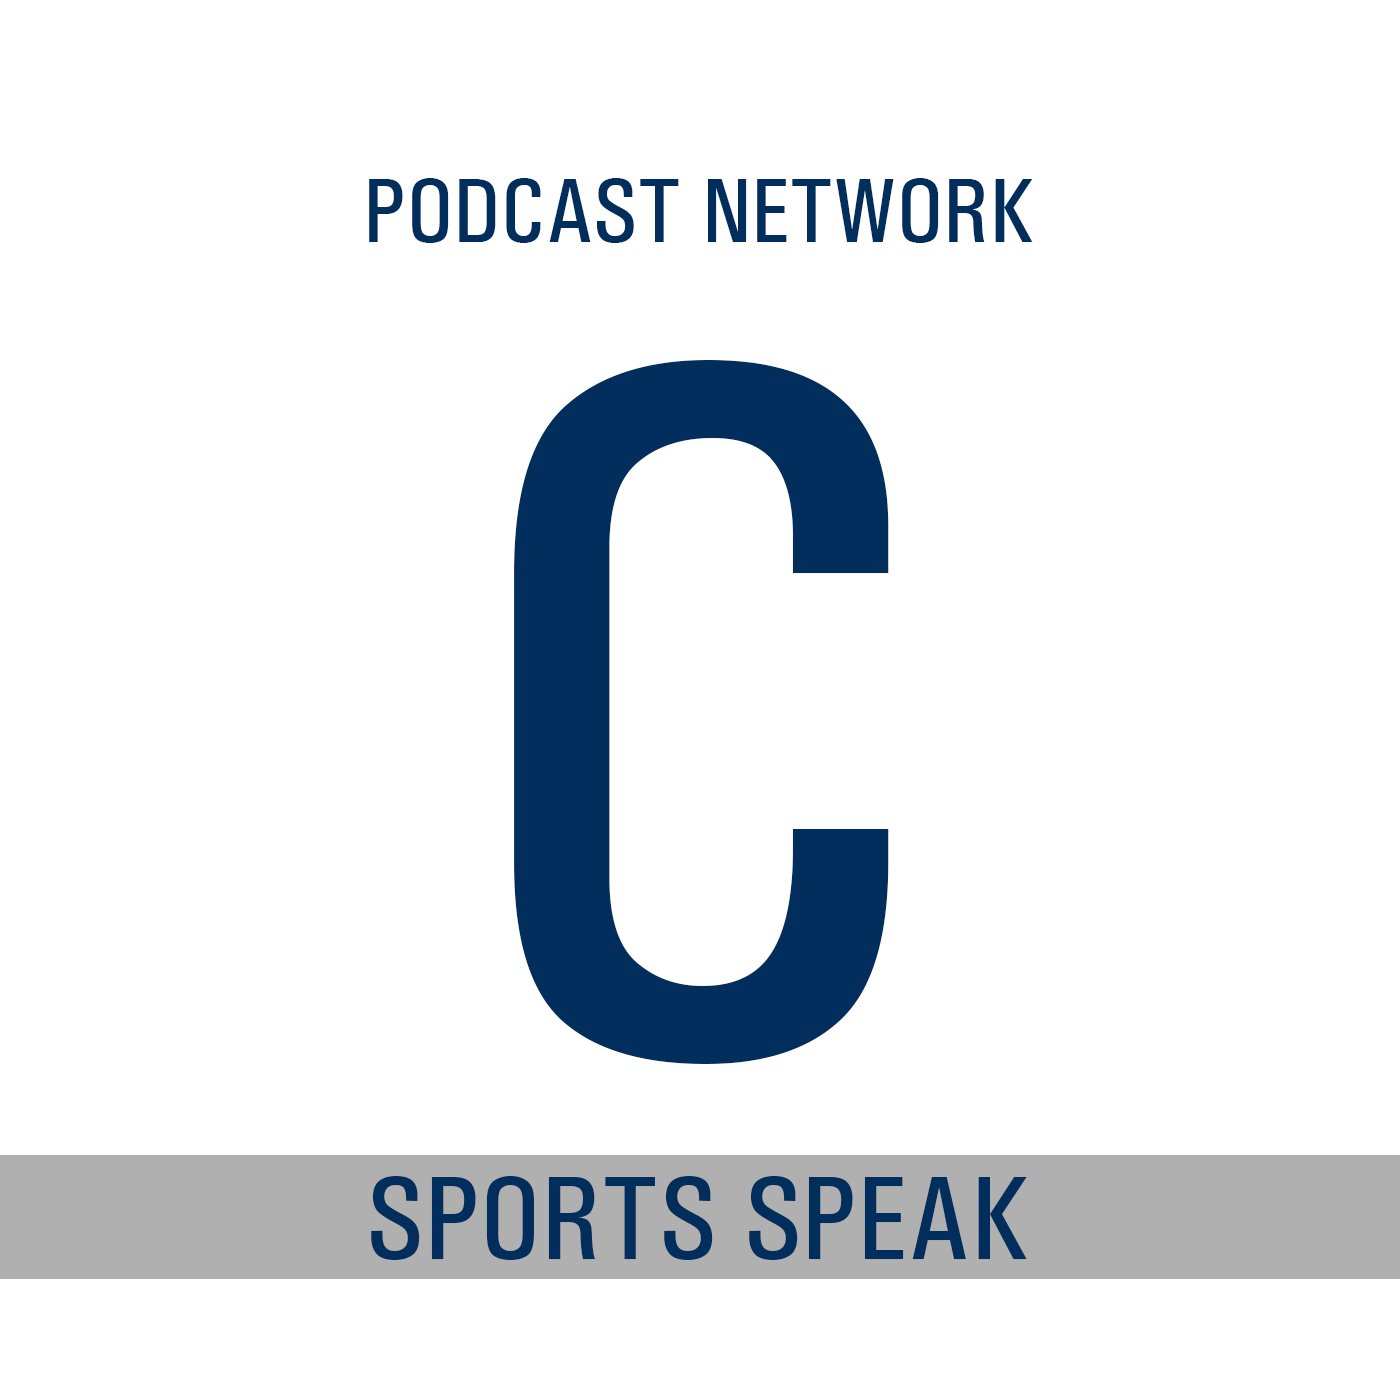 A weekly @DailyCollegian podcast dedicated to telling the unknown stories behind Penn State athletics, hosted by @davideckert98 and @andrewrubin24.